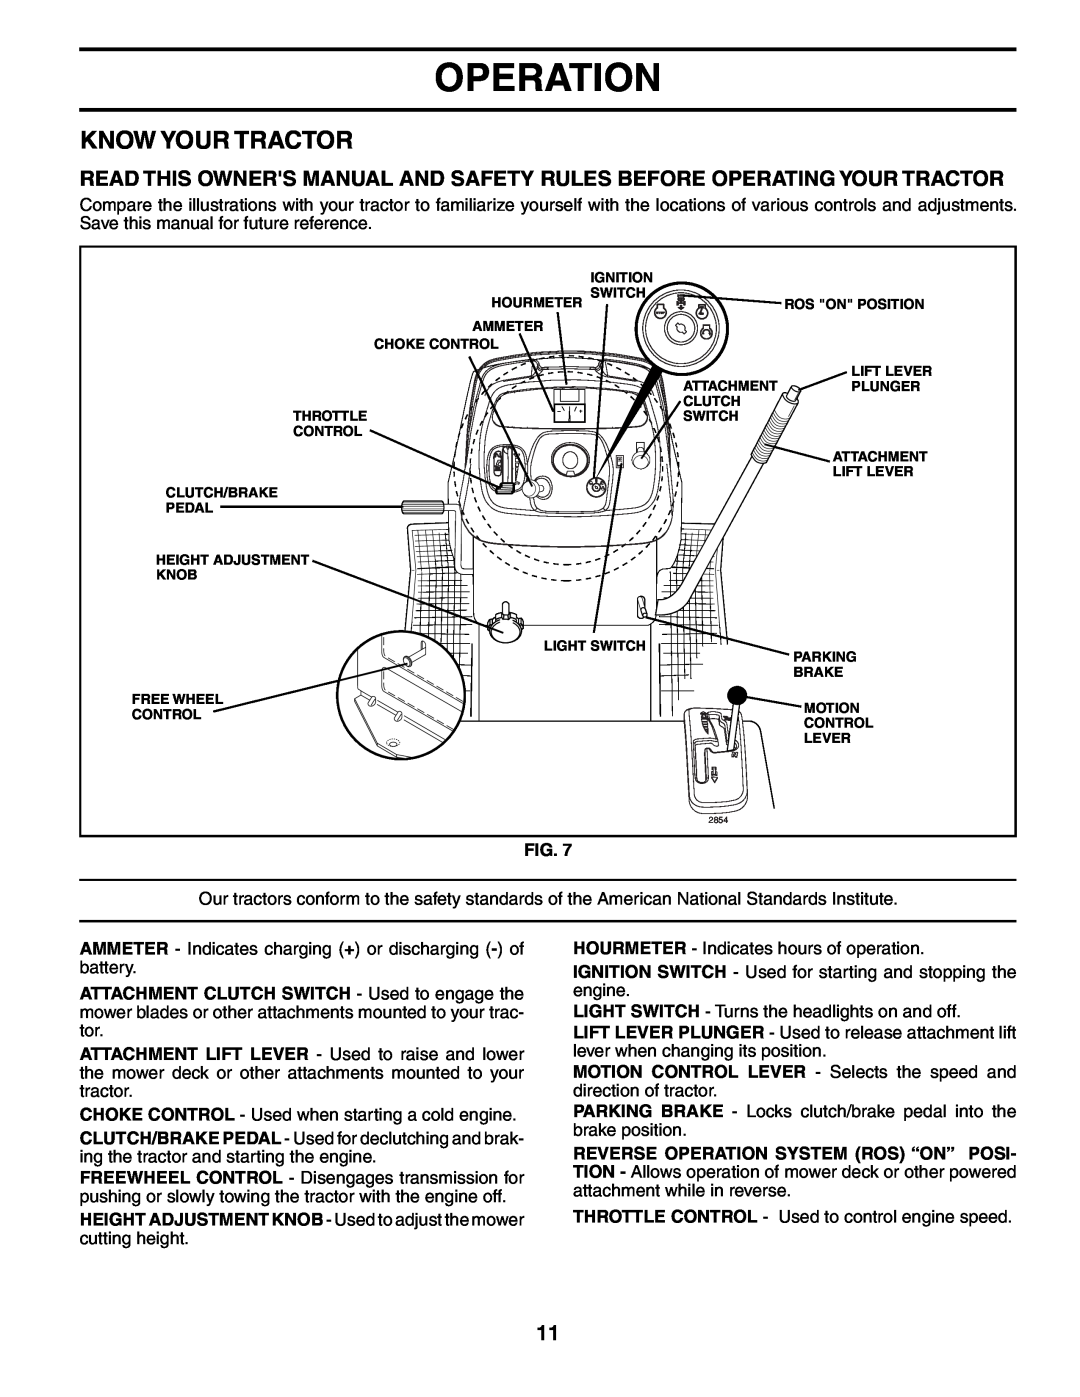 Poulan DB27H48YT manual Know Your Tractor, Operation, Fig 